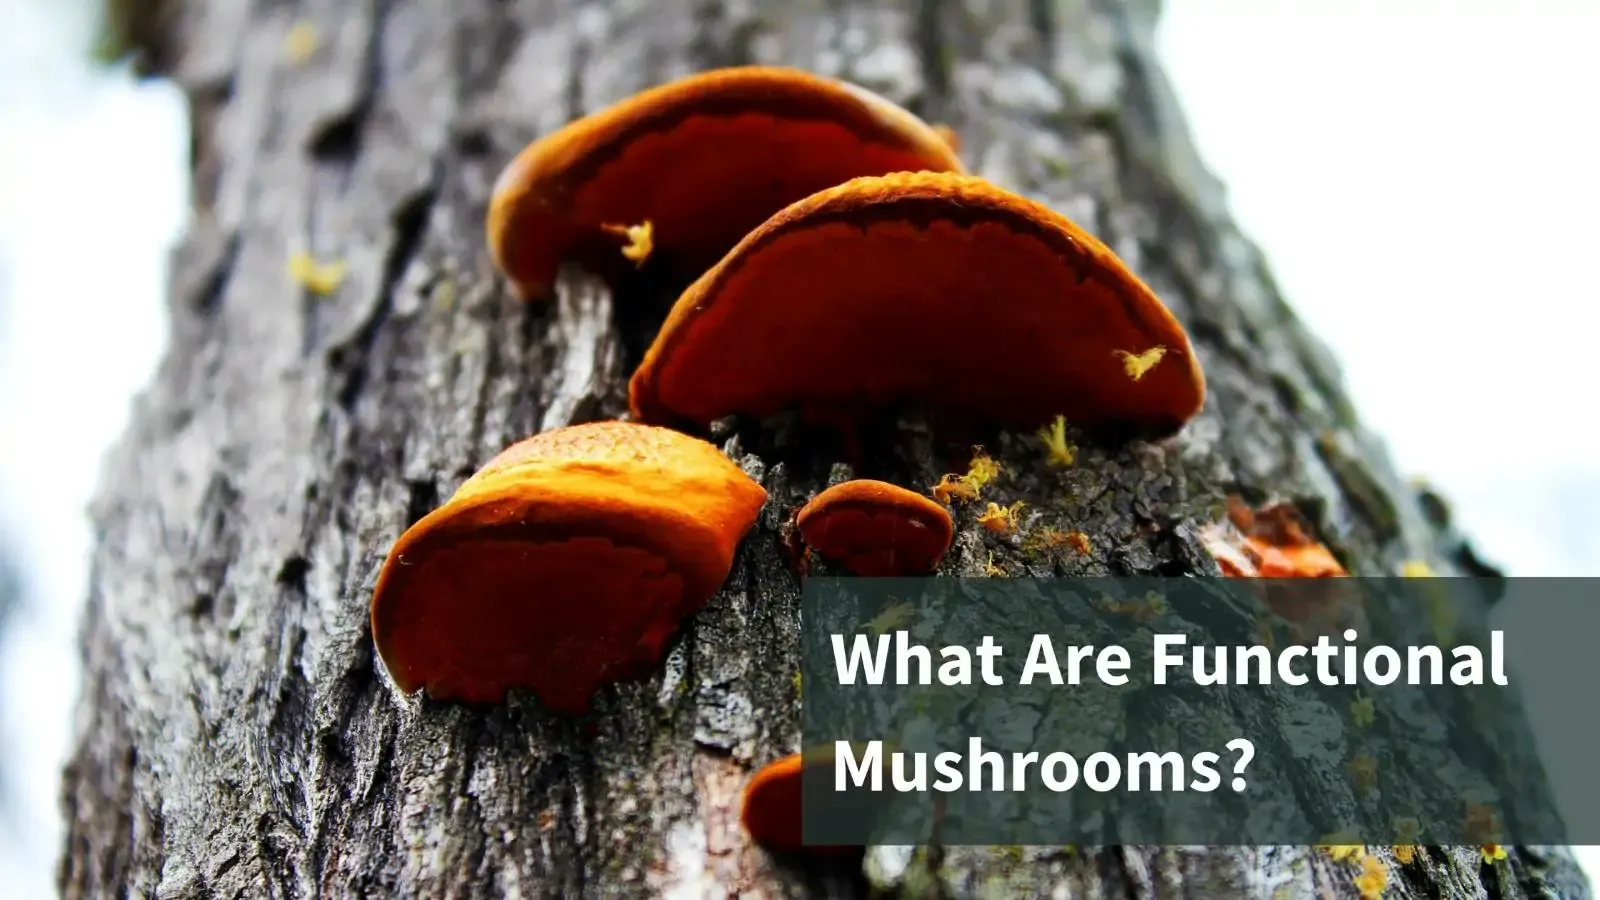 Functional Mushrooms: What Are They & What Do They Do?